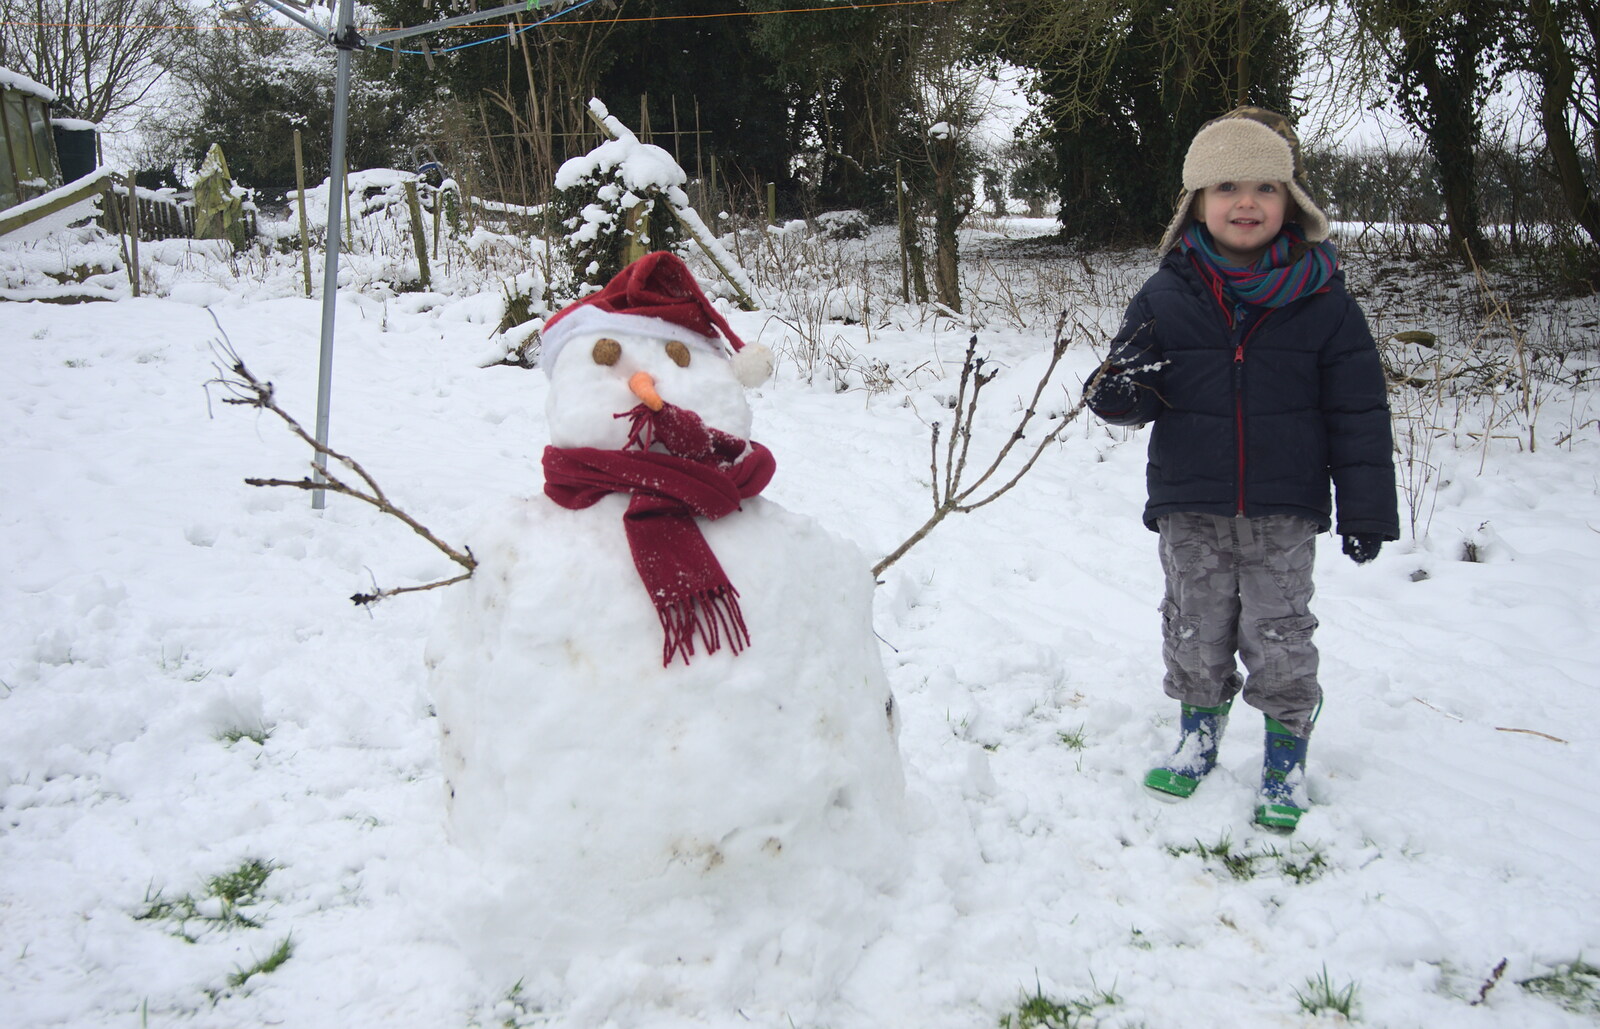 More Snow Days and a Wind Turbine is Built, Brome, Suffolk - 19th January 2013: The completed snow man